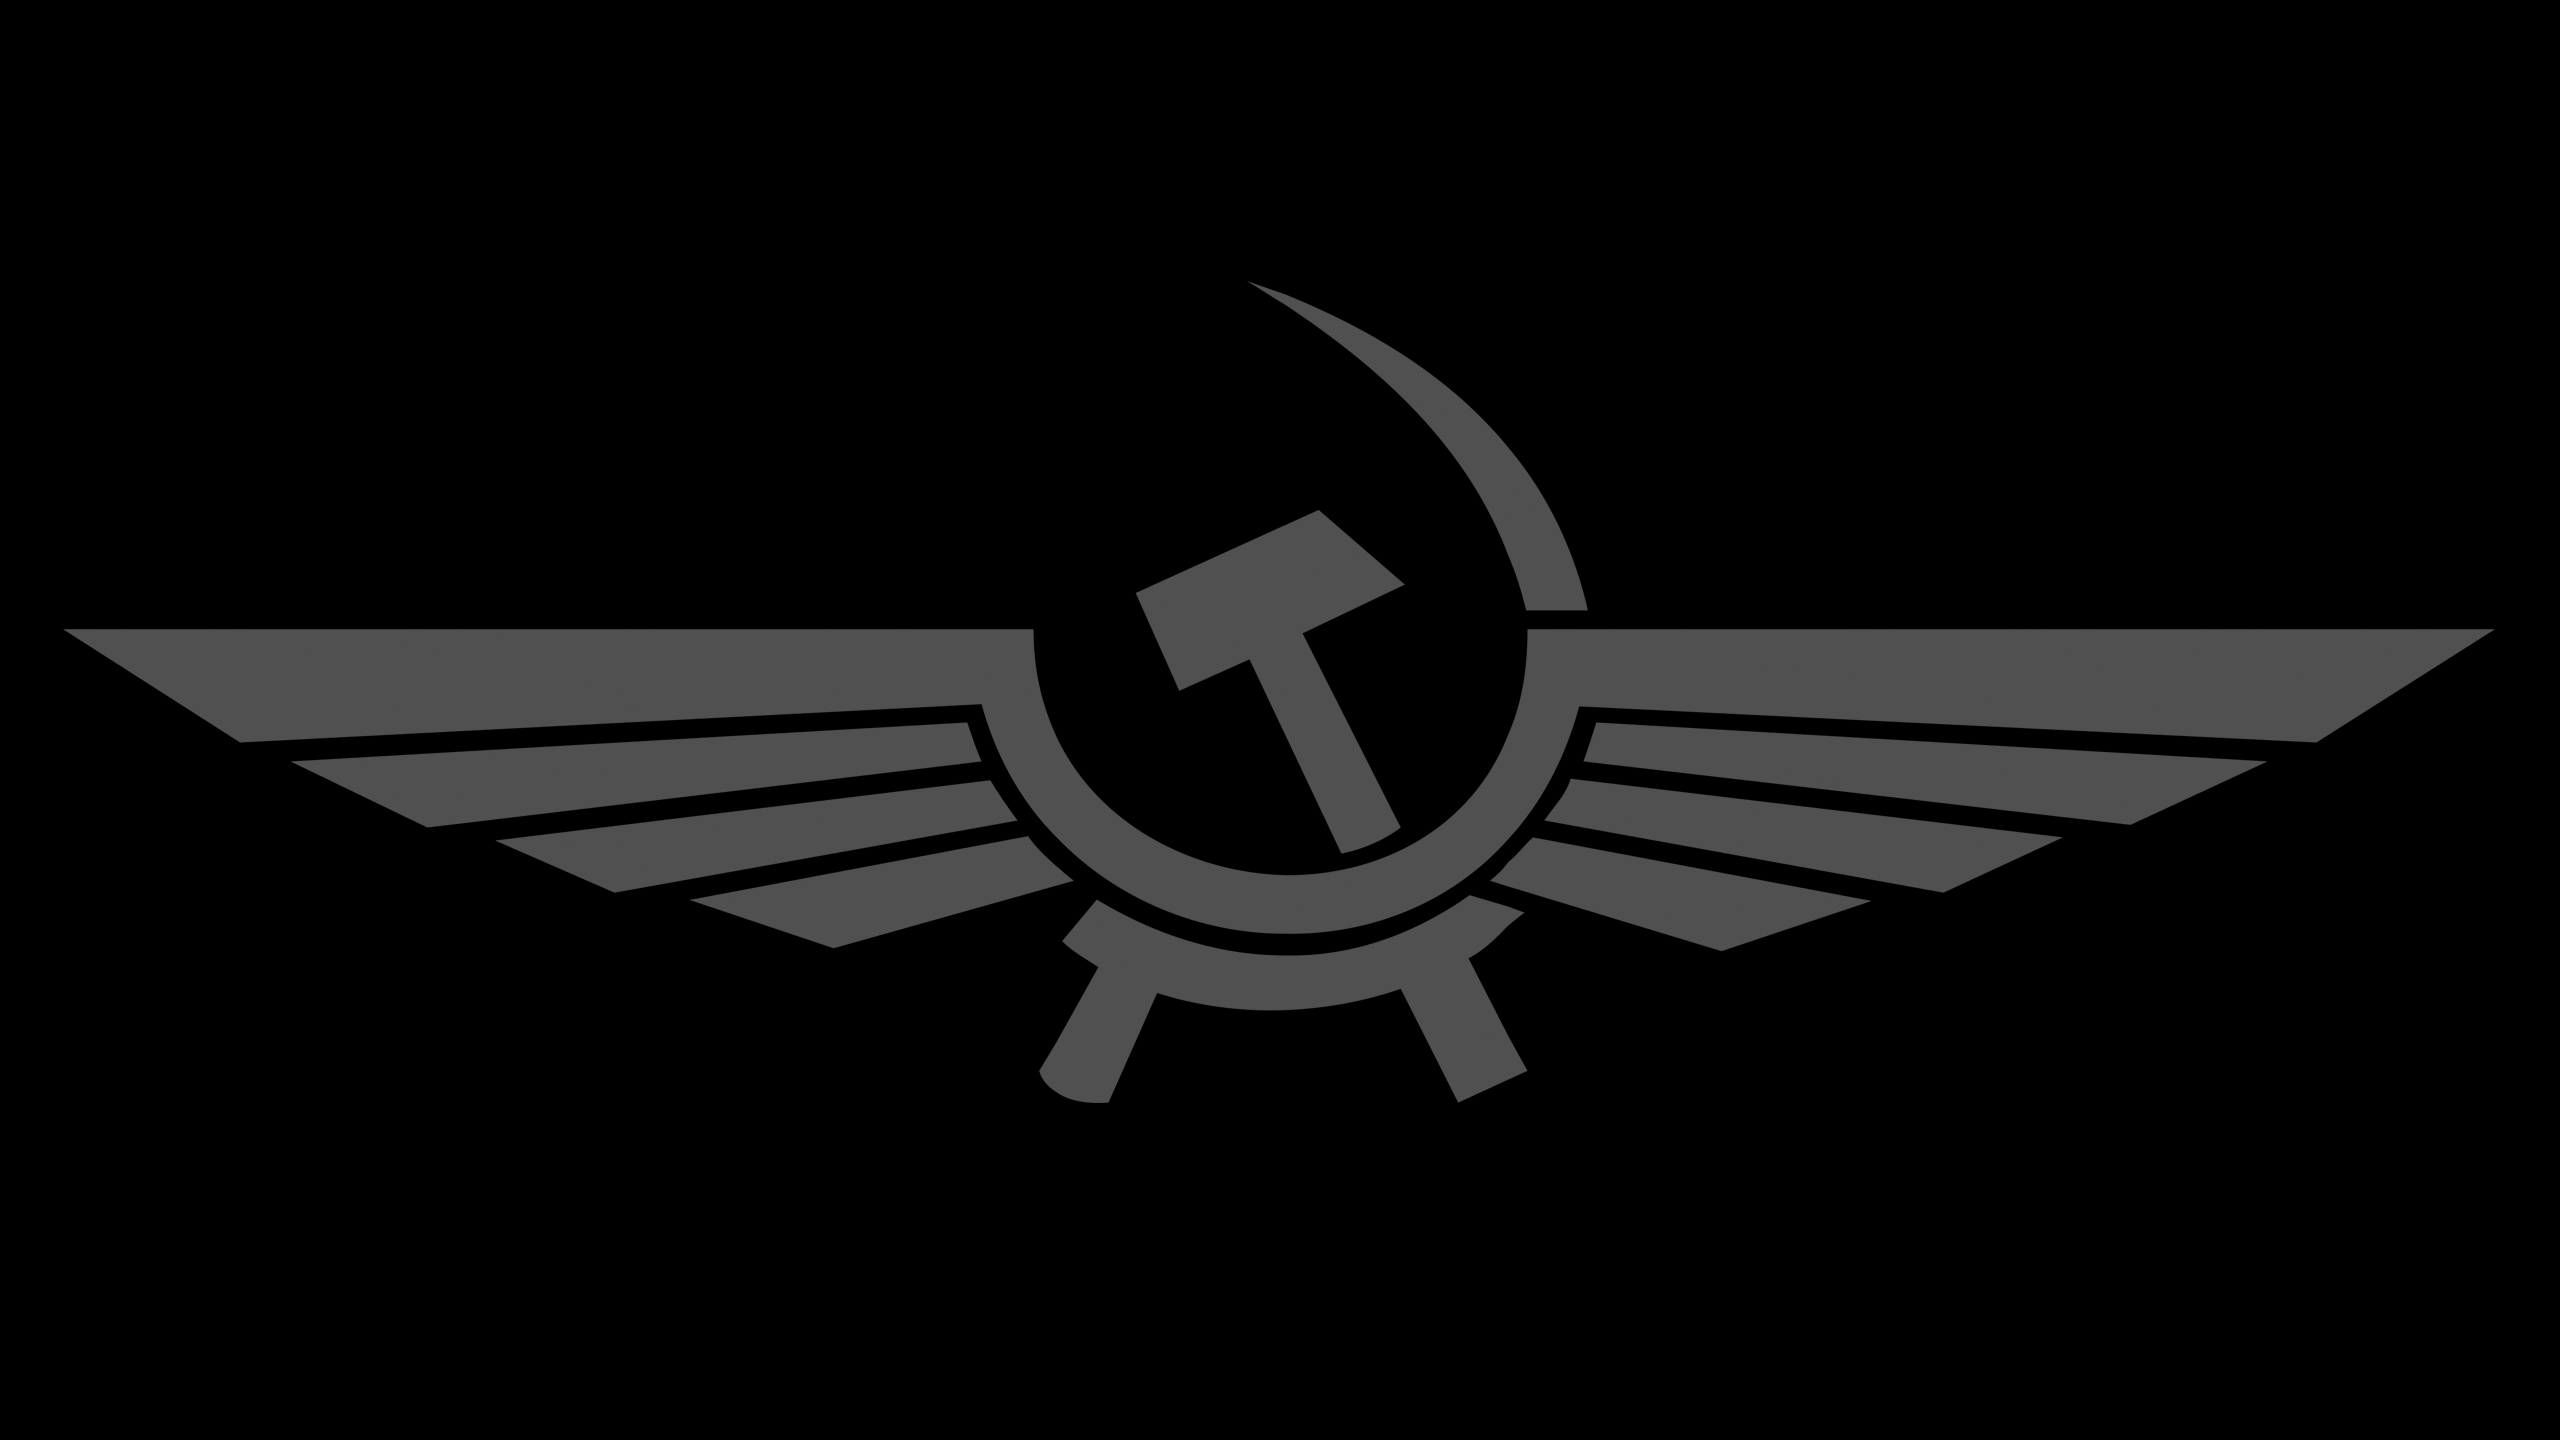 Aircraft Logo Monochrome Simple Background Hammer And Sickle 2560x1440